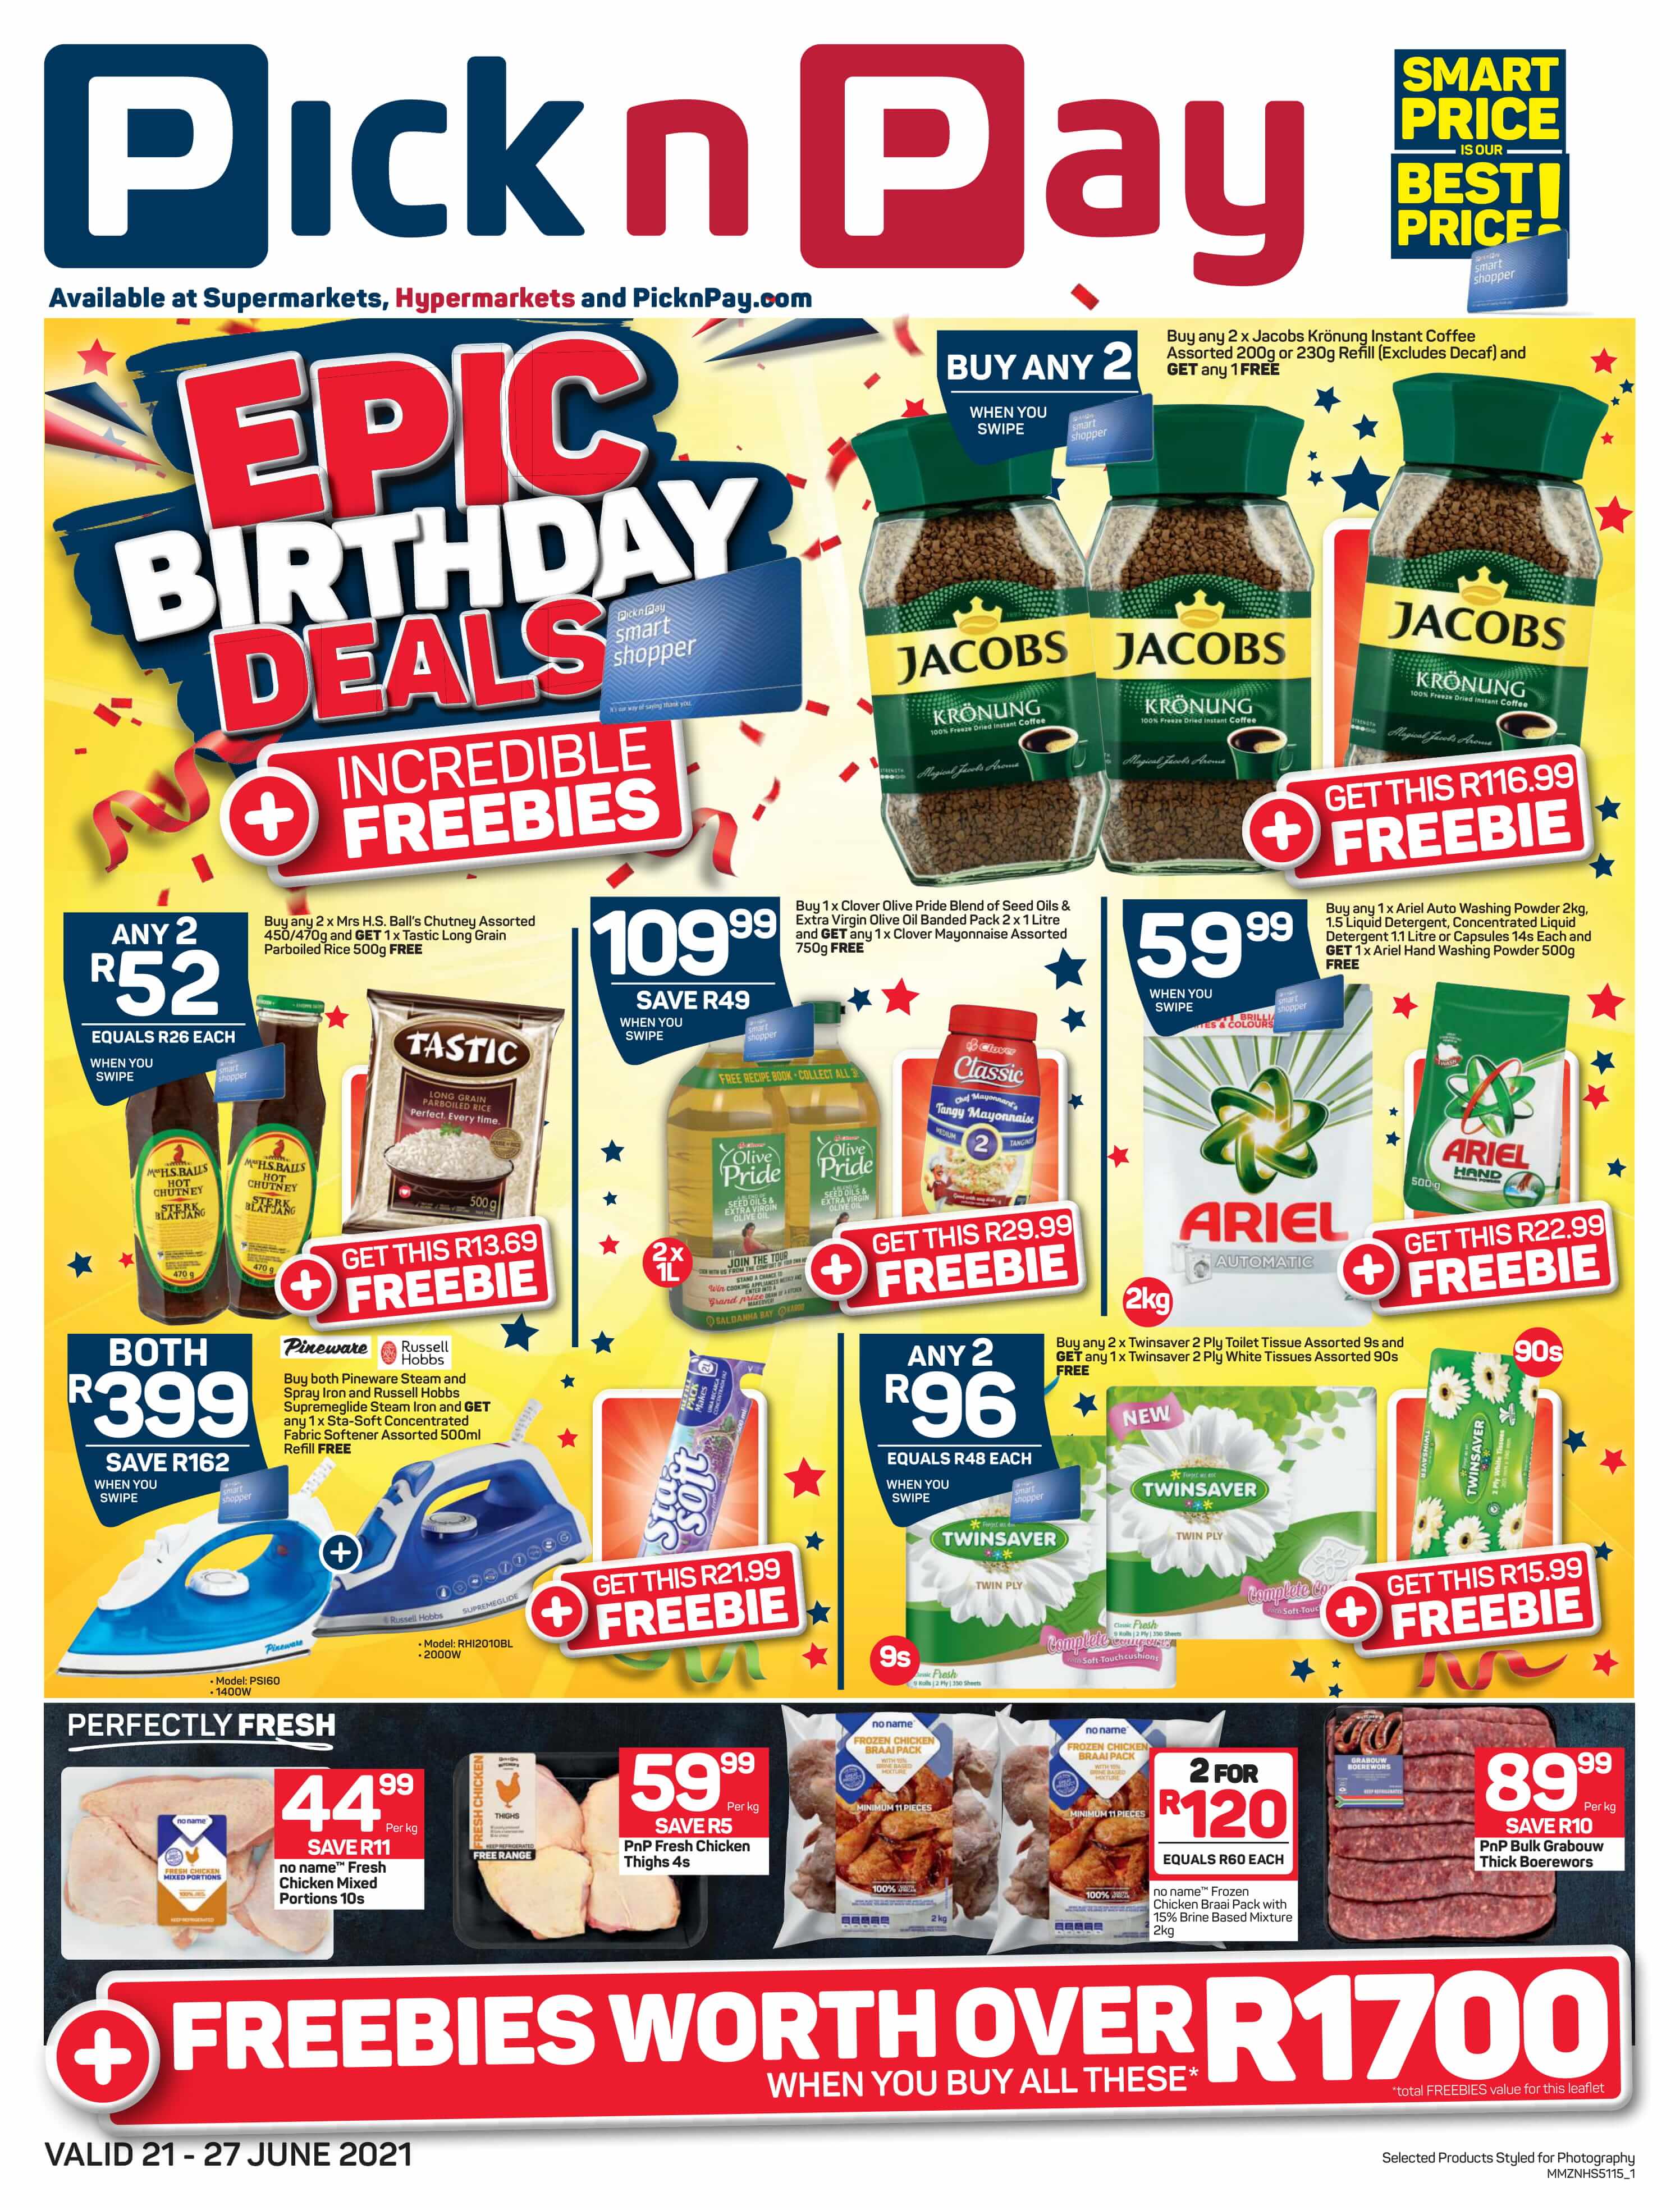 Pick n Pay Specials 21 – 27 June 2021